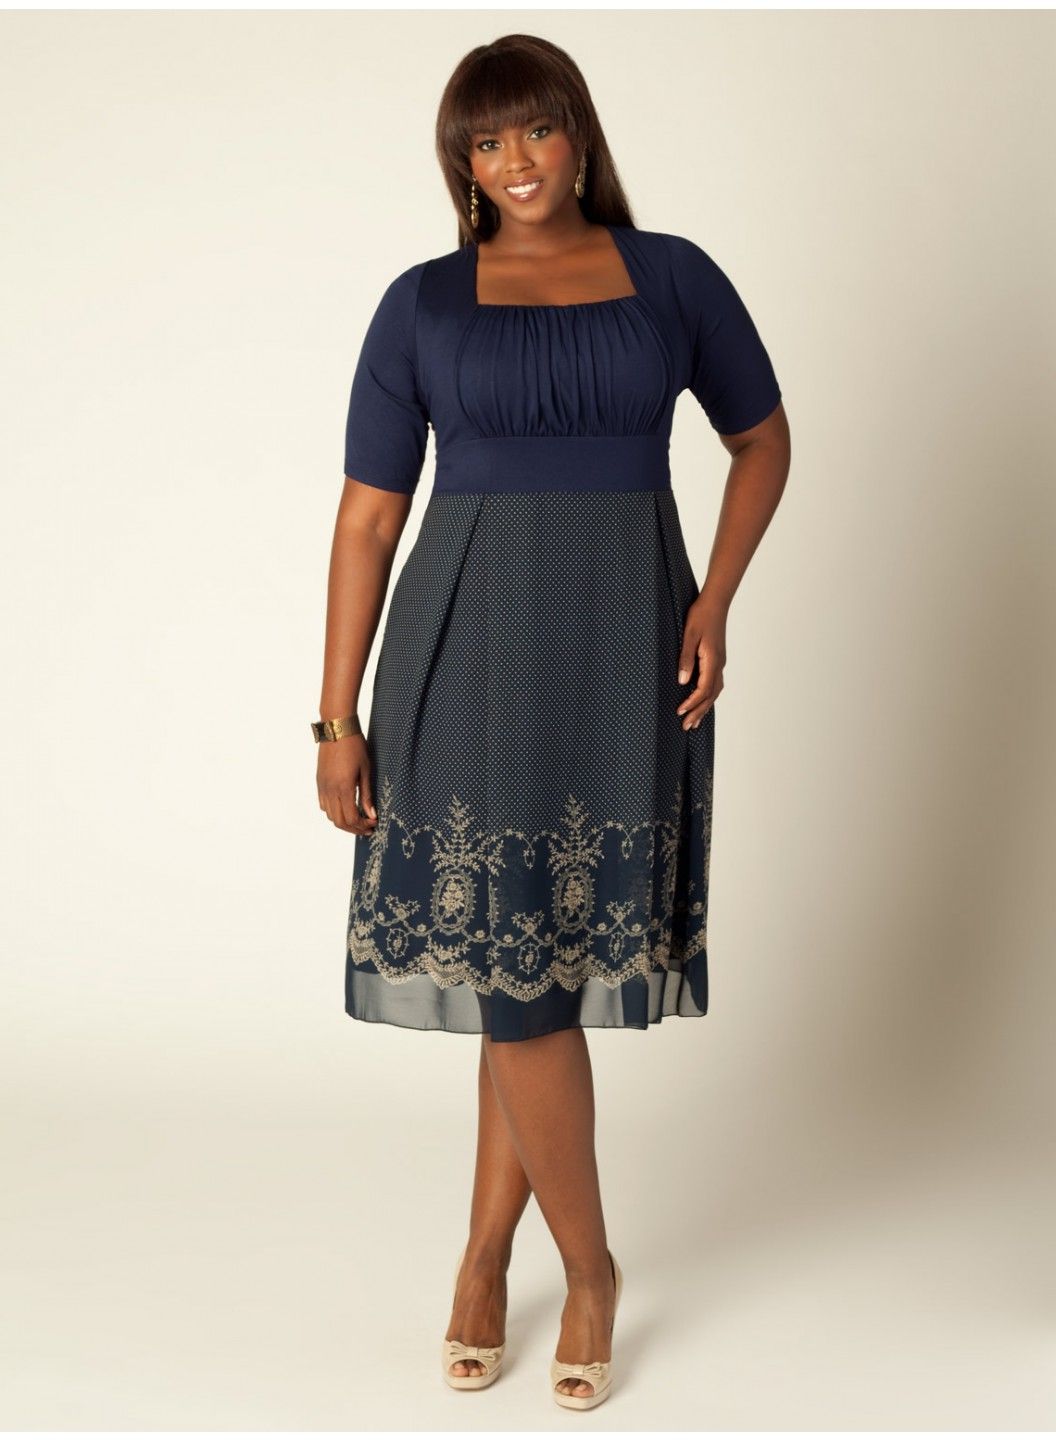 plus size dresses to wear to a wedding photo - 1